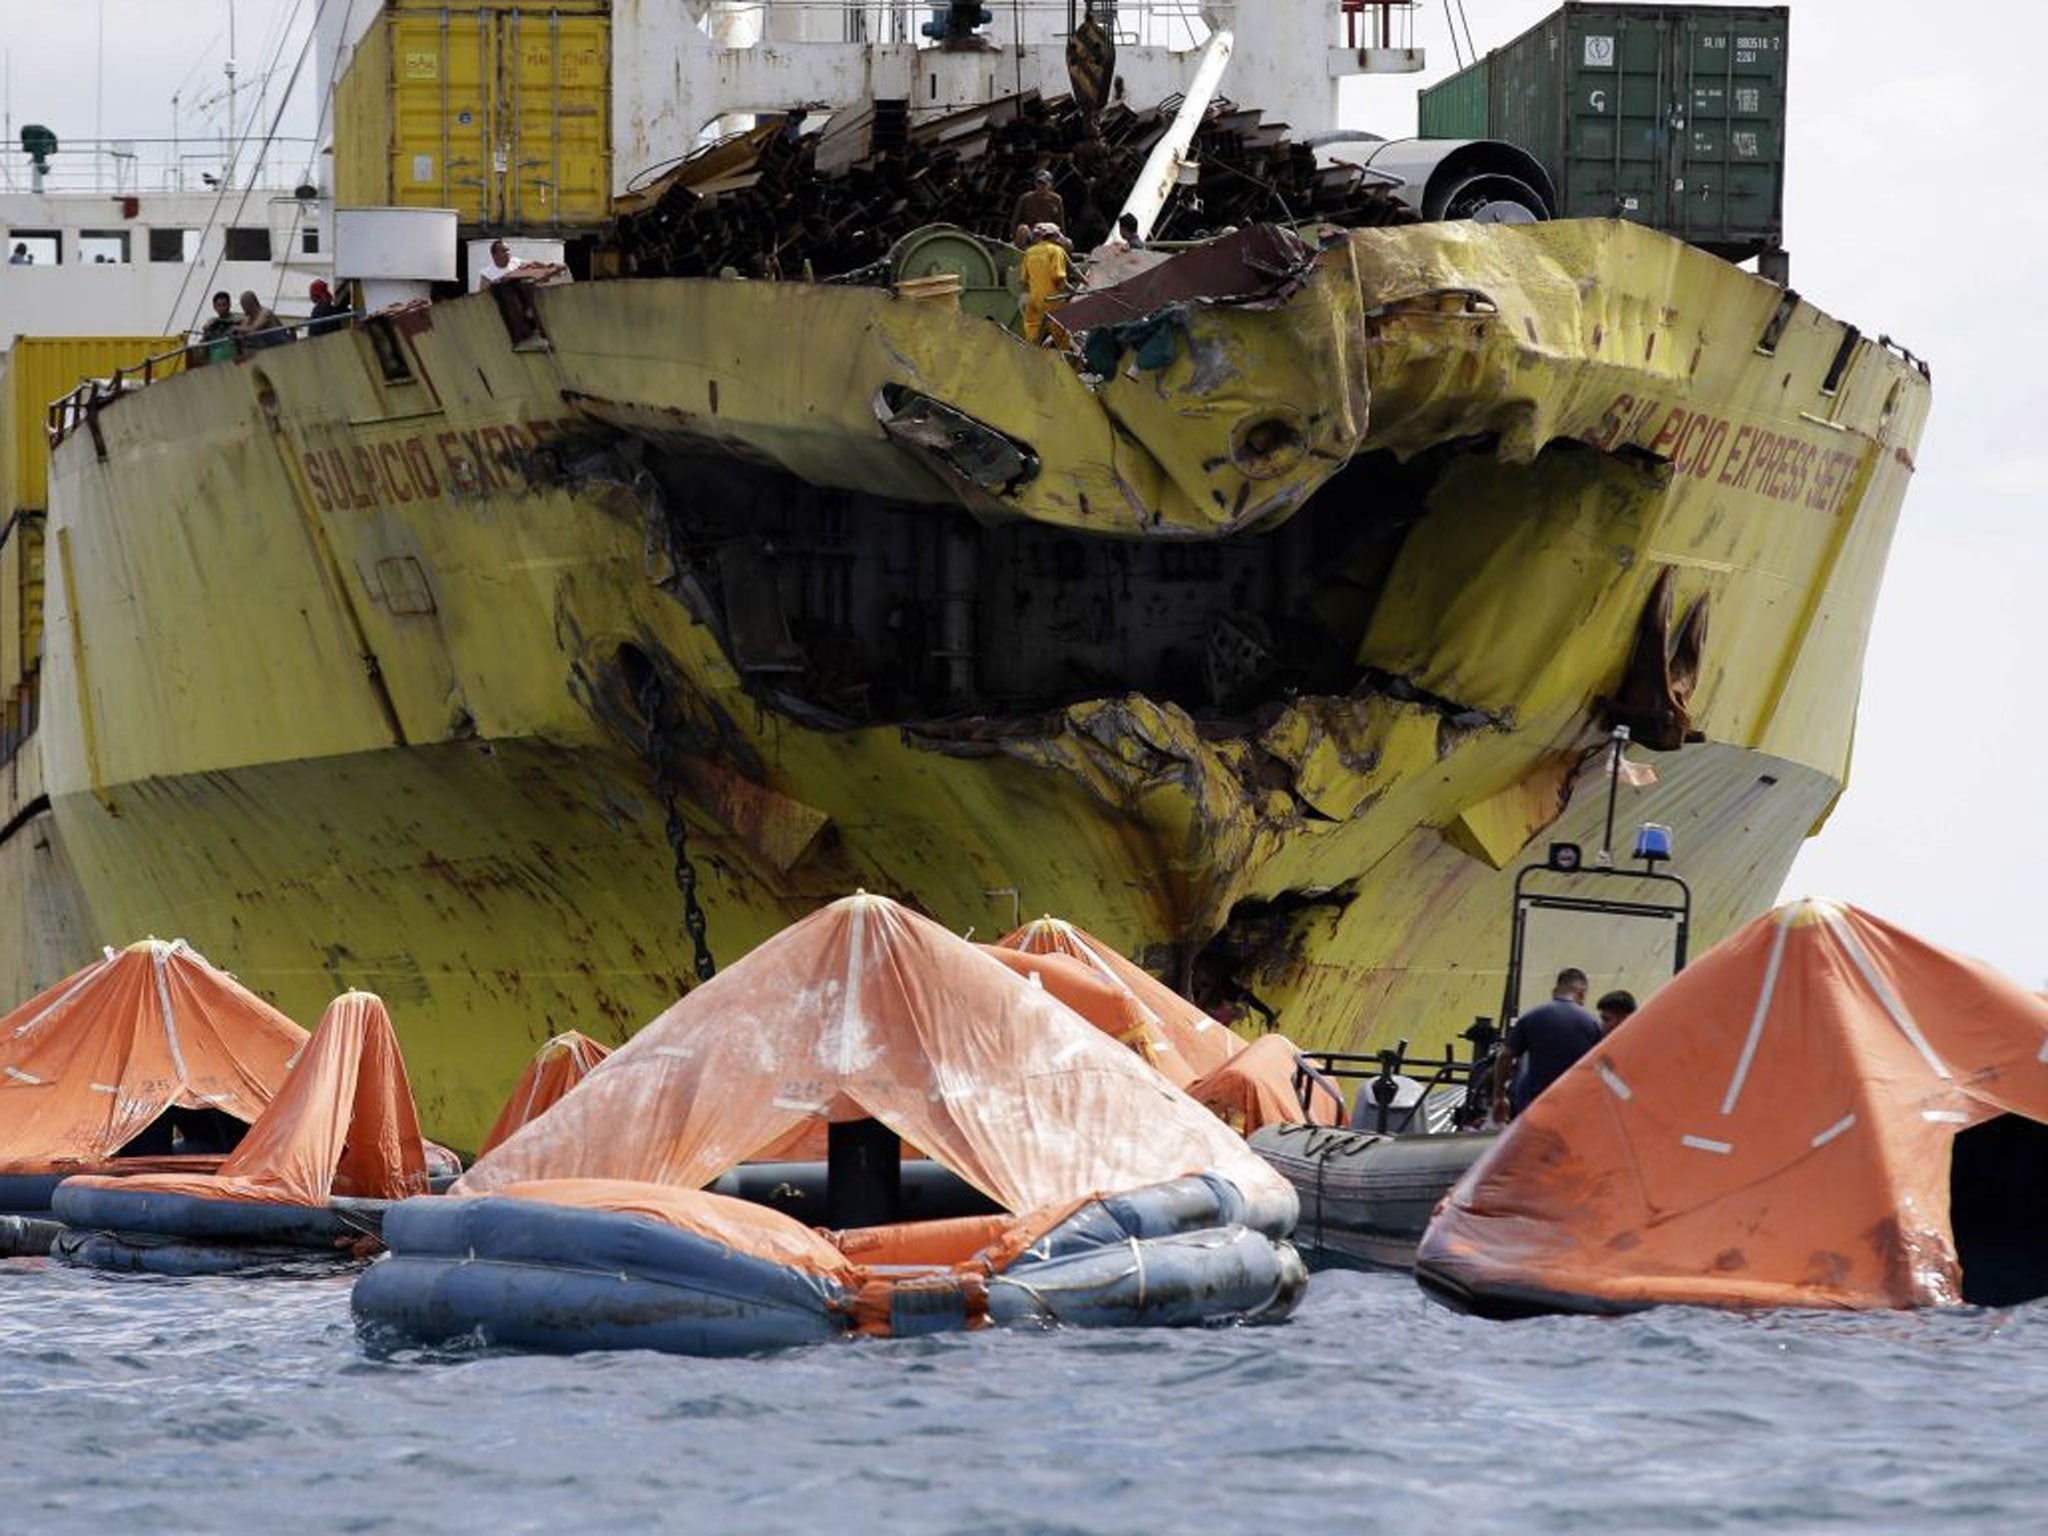 A cluster of life rafts floats near the cargo ship Sulpicio Express Siete Saturday Aug. 17, 2013, a day after it collided with a passenger ferry